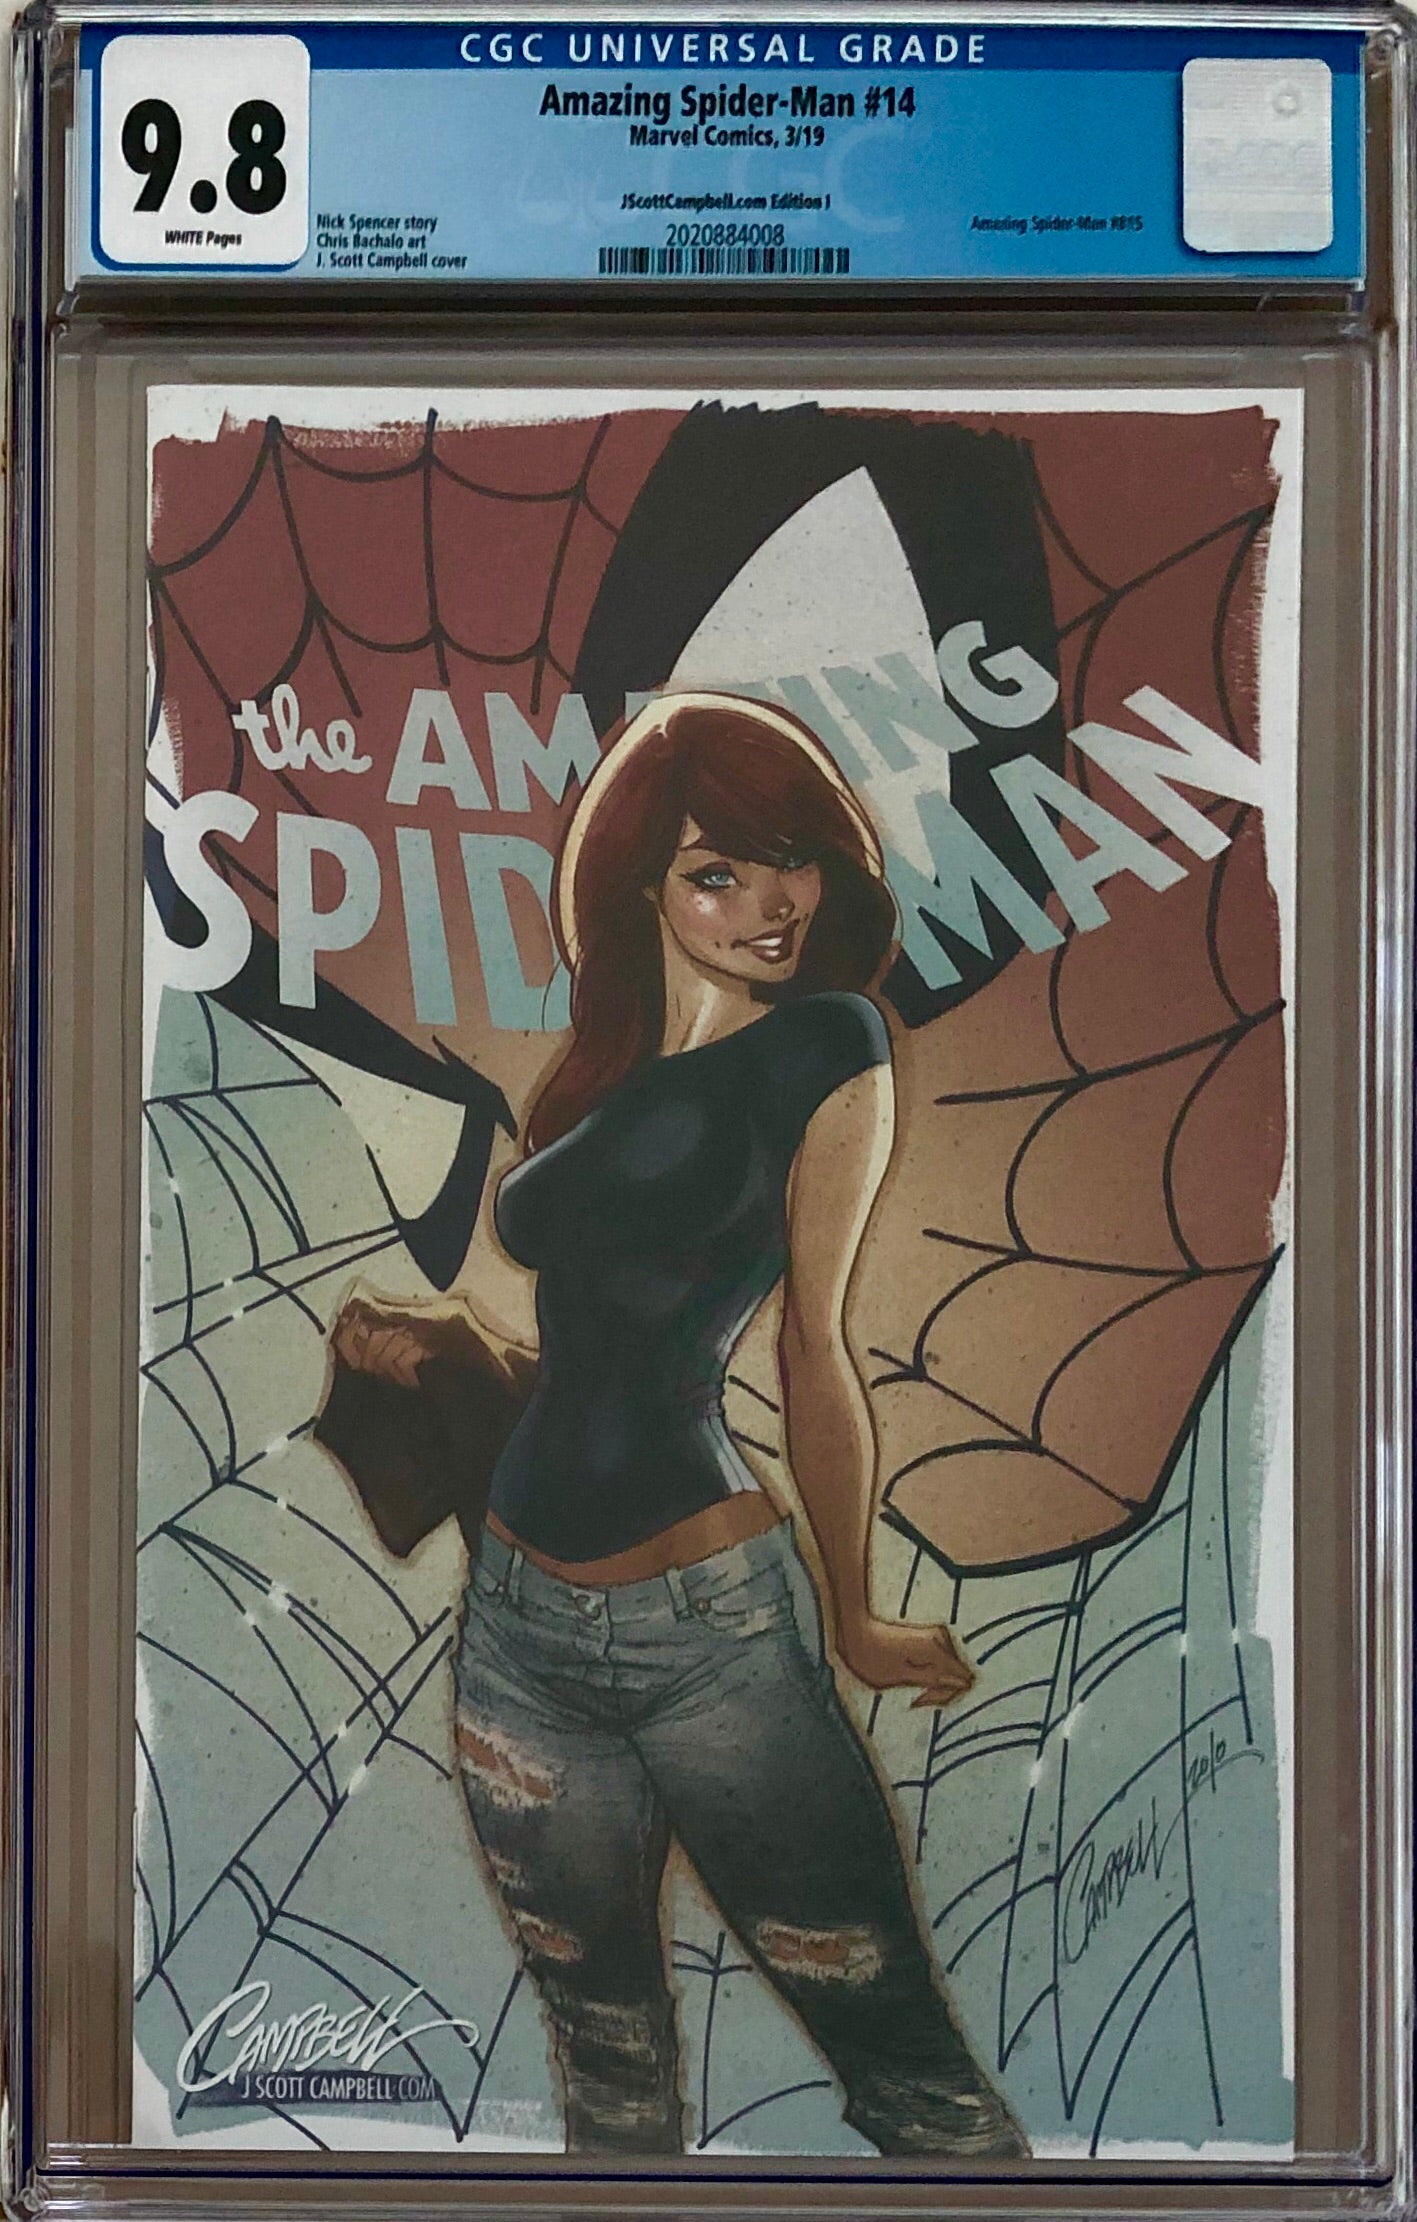 Amazing Spider-Man #14 J. Scott Campbell Edition I "Face it Tiger" MJ SDCC Exclusive CGC 9.8